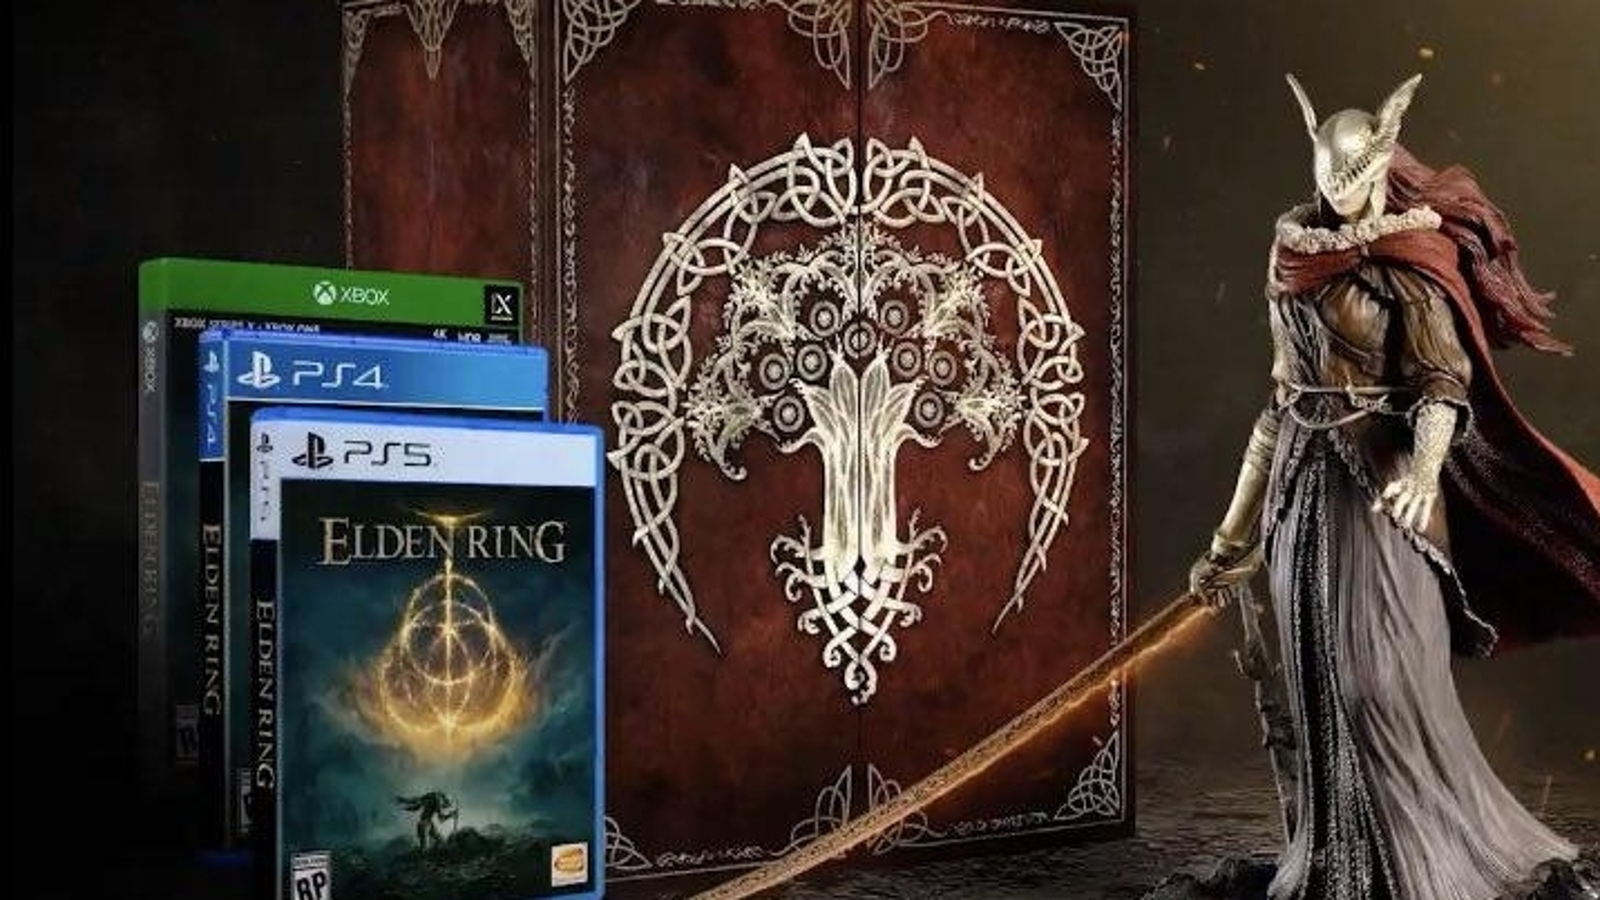  Elden Ring Collector Edition (PS4) : Video Games